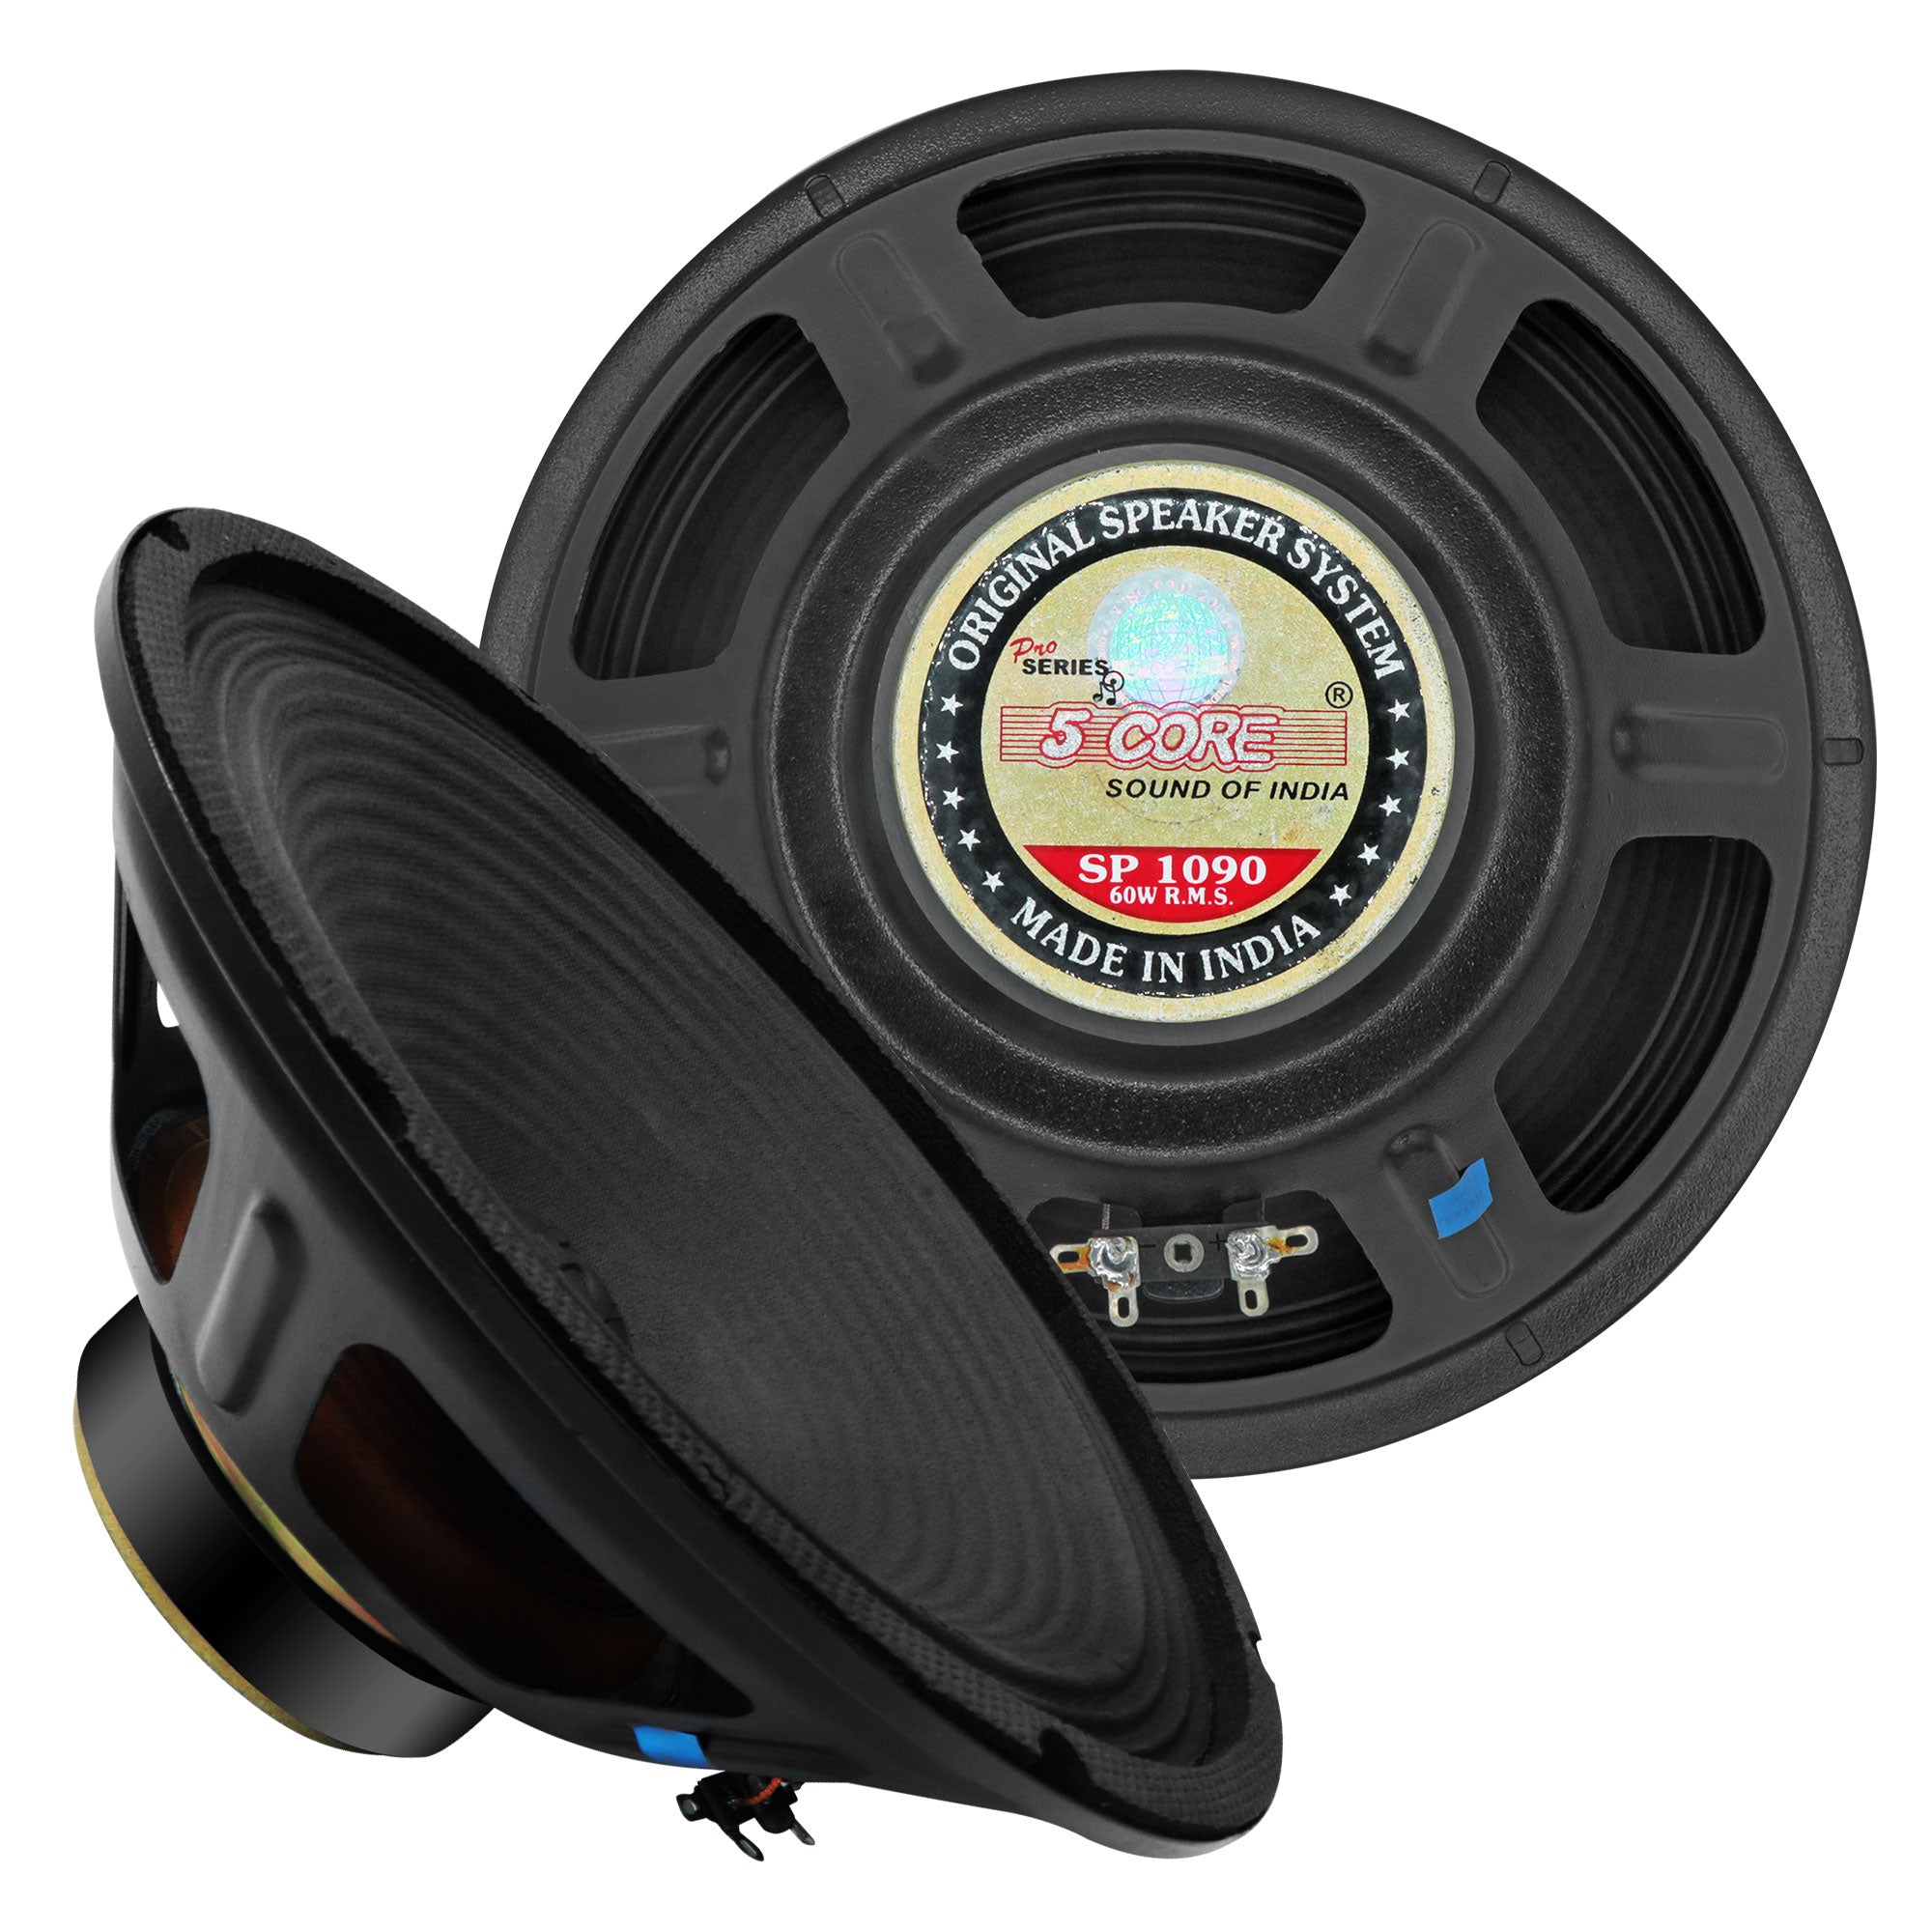 5 Core 10 Inch Subwoofer 600W Peak 4 Ohm Replacement Car Bass Sub Woofer Speaker w 13 Oz Magnet